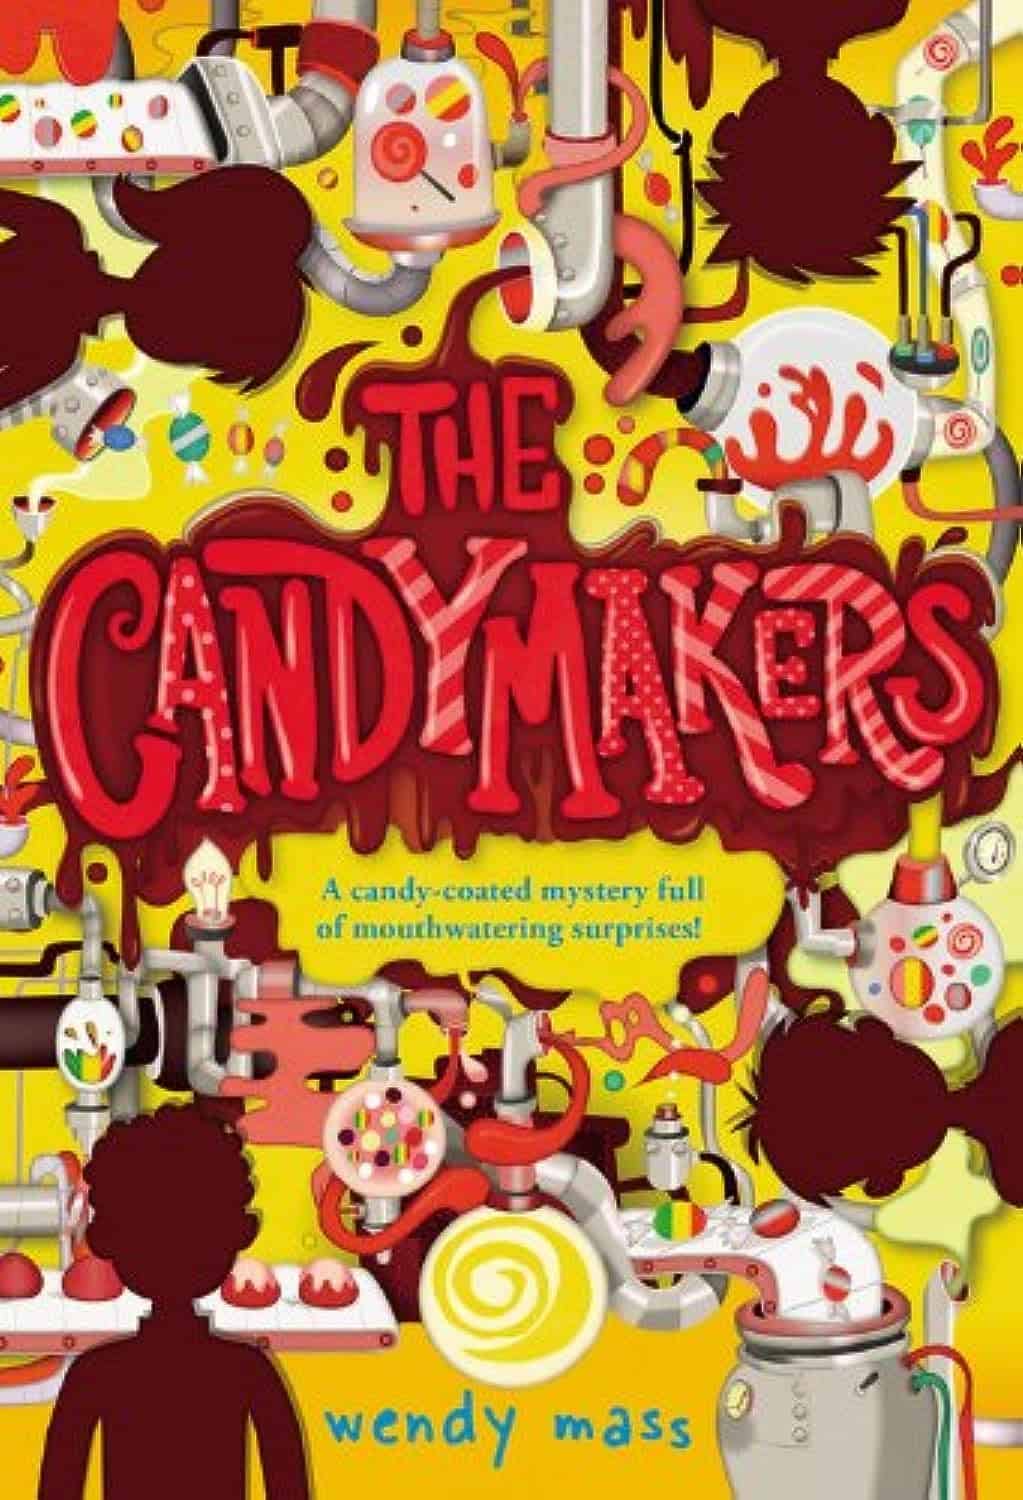 The Candymakers by Wendy Maas